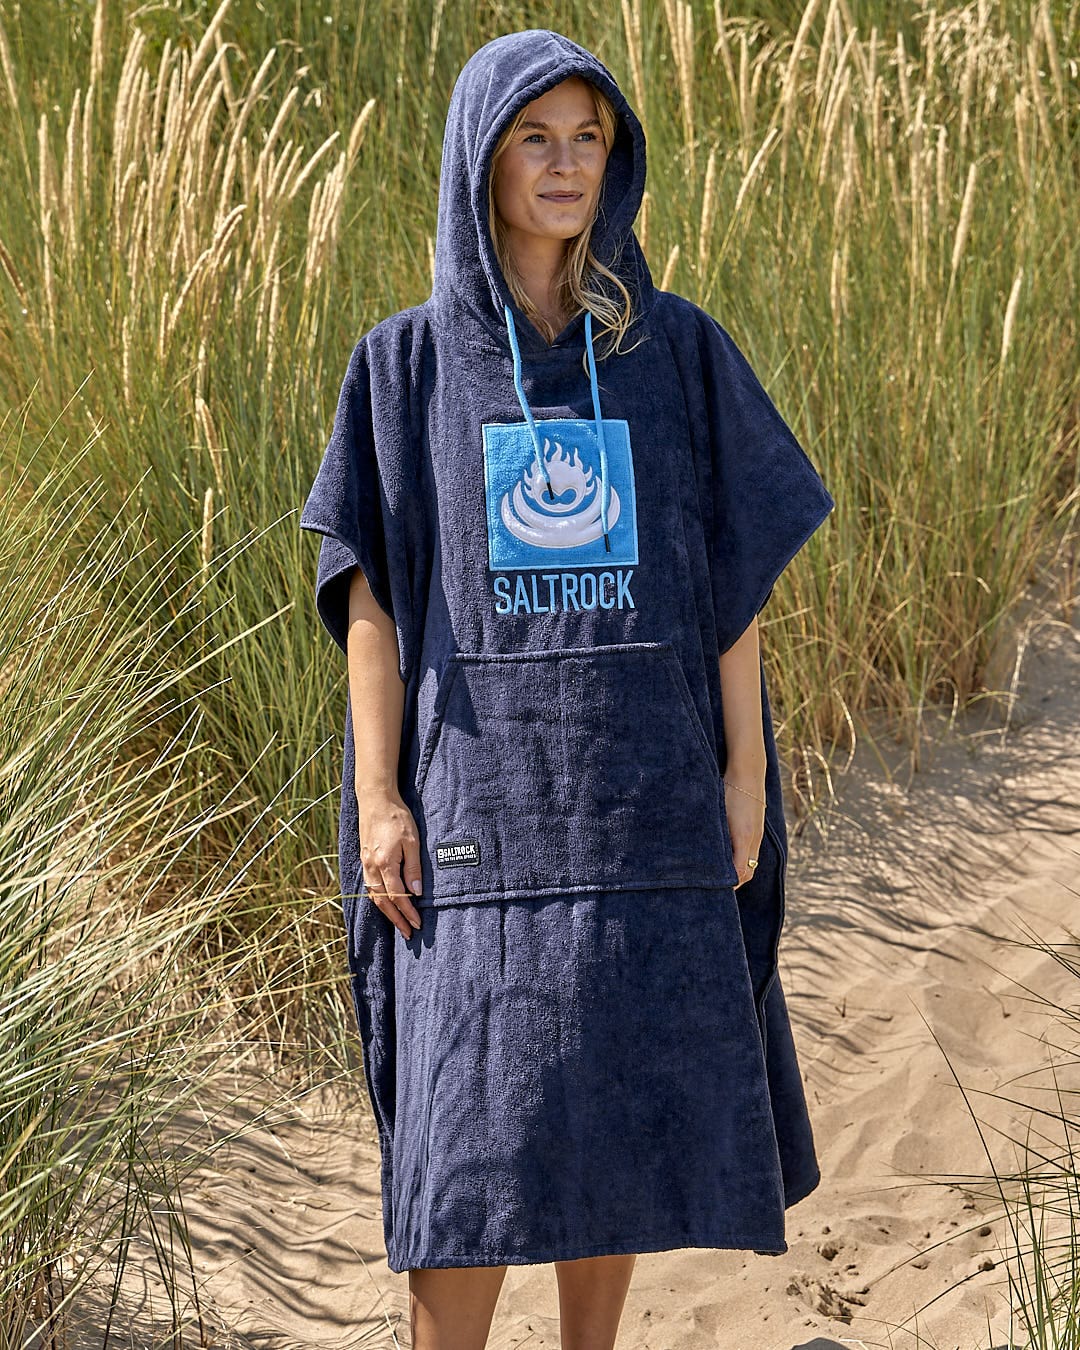 A woman wearing a Saltrock hooded poncho on the beach.